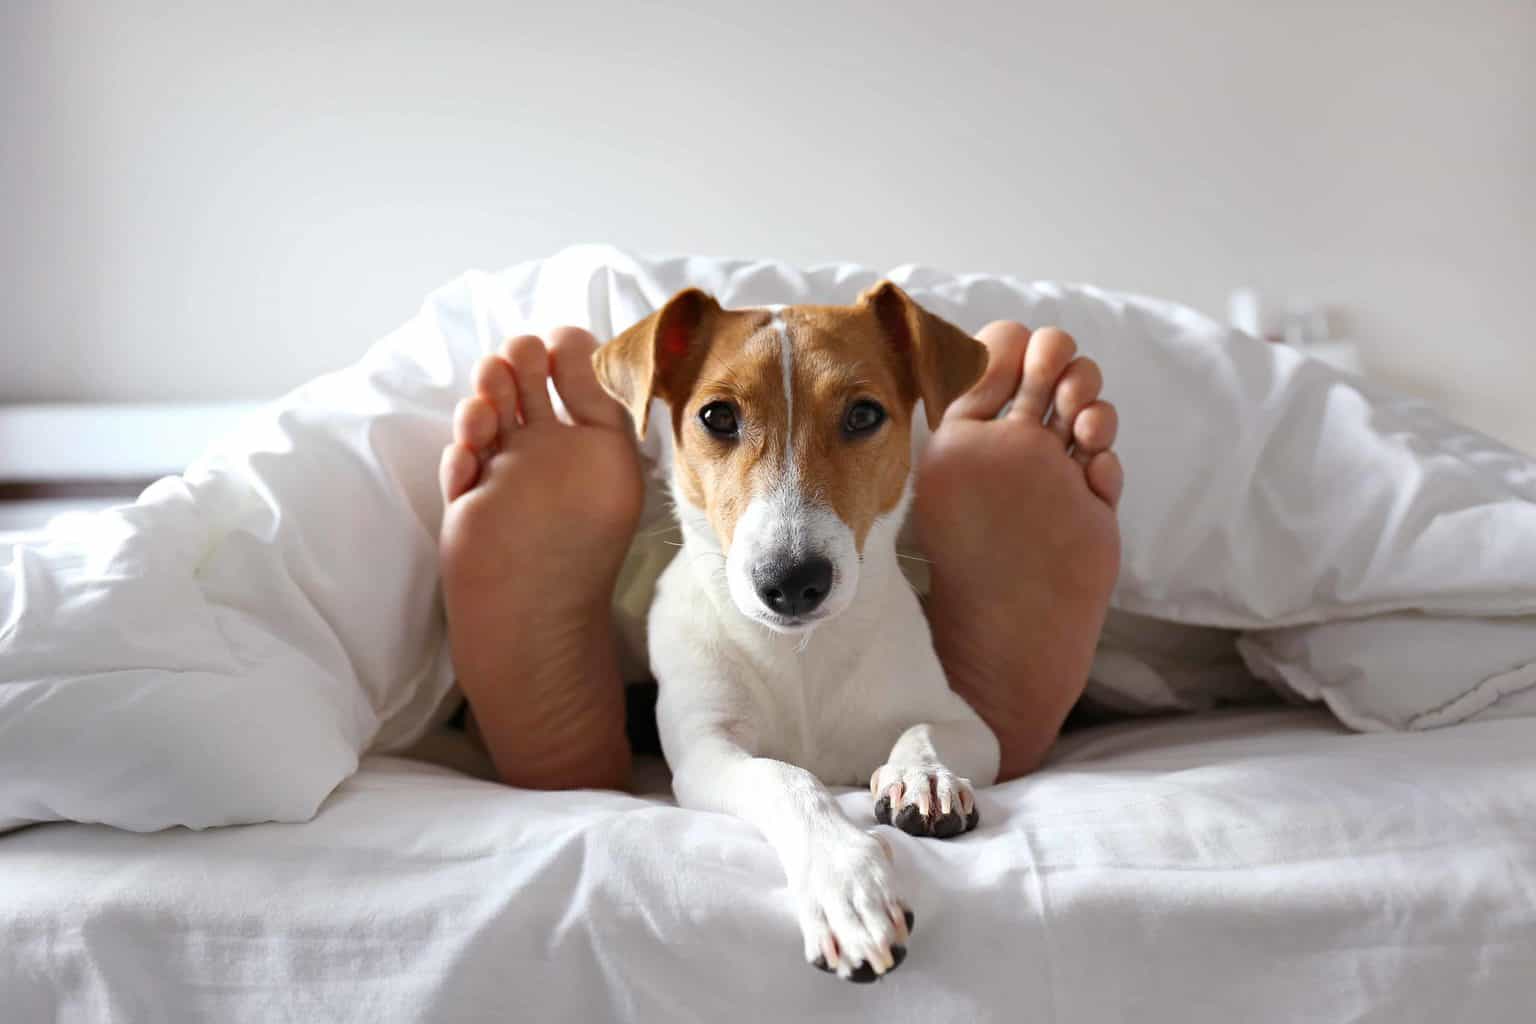 Jack Russell Terrier sleeps between its owners feet. Find the best option to stop your dog from sleeping on your bed. Breaking this habit requires effort to retrain your dog to sleep by itself.